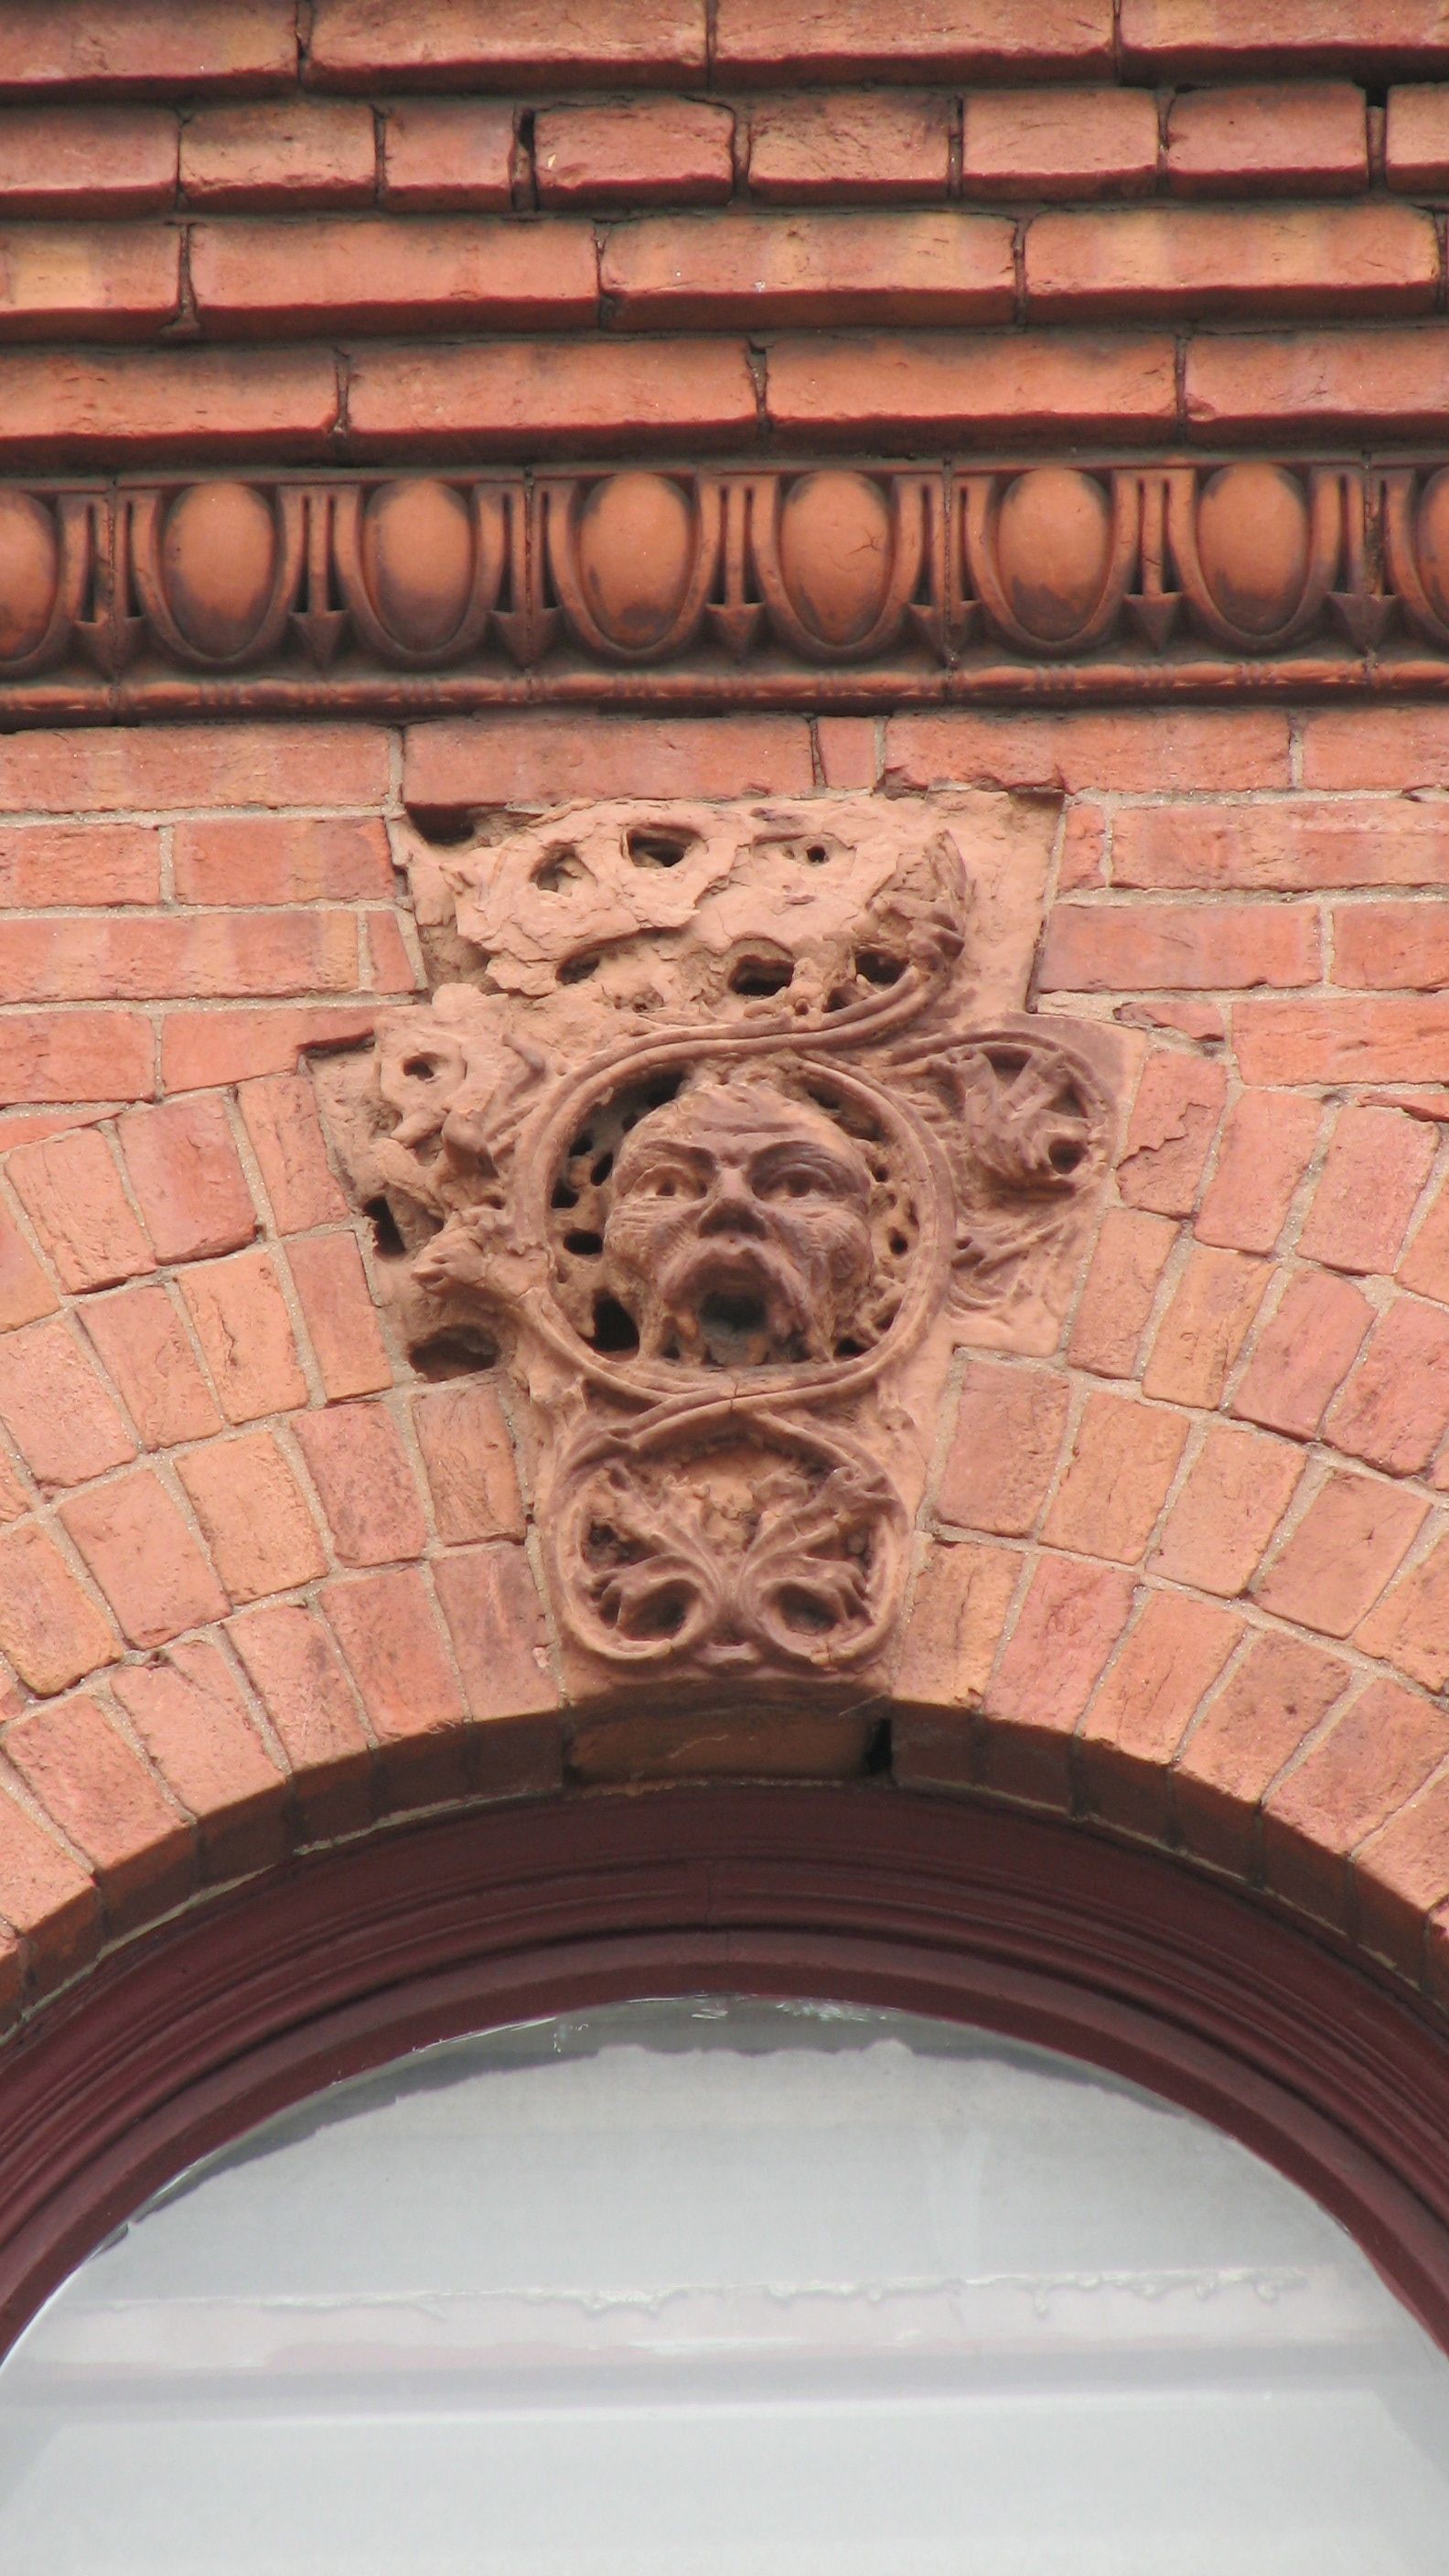 A detail above the third-story window.